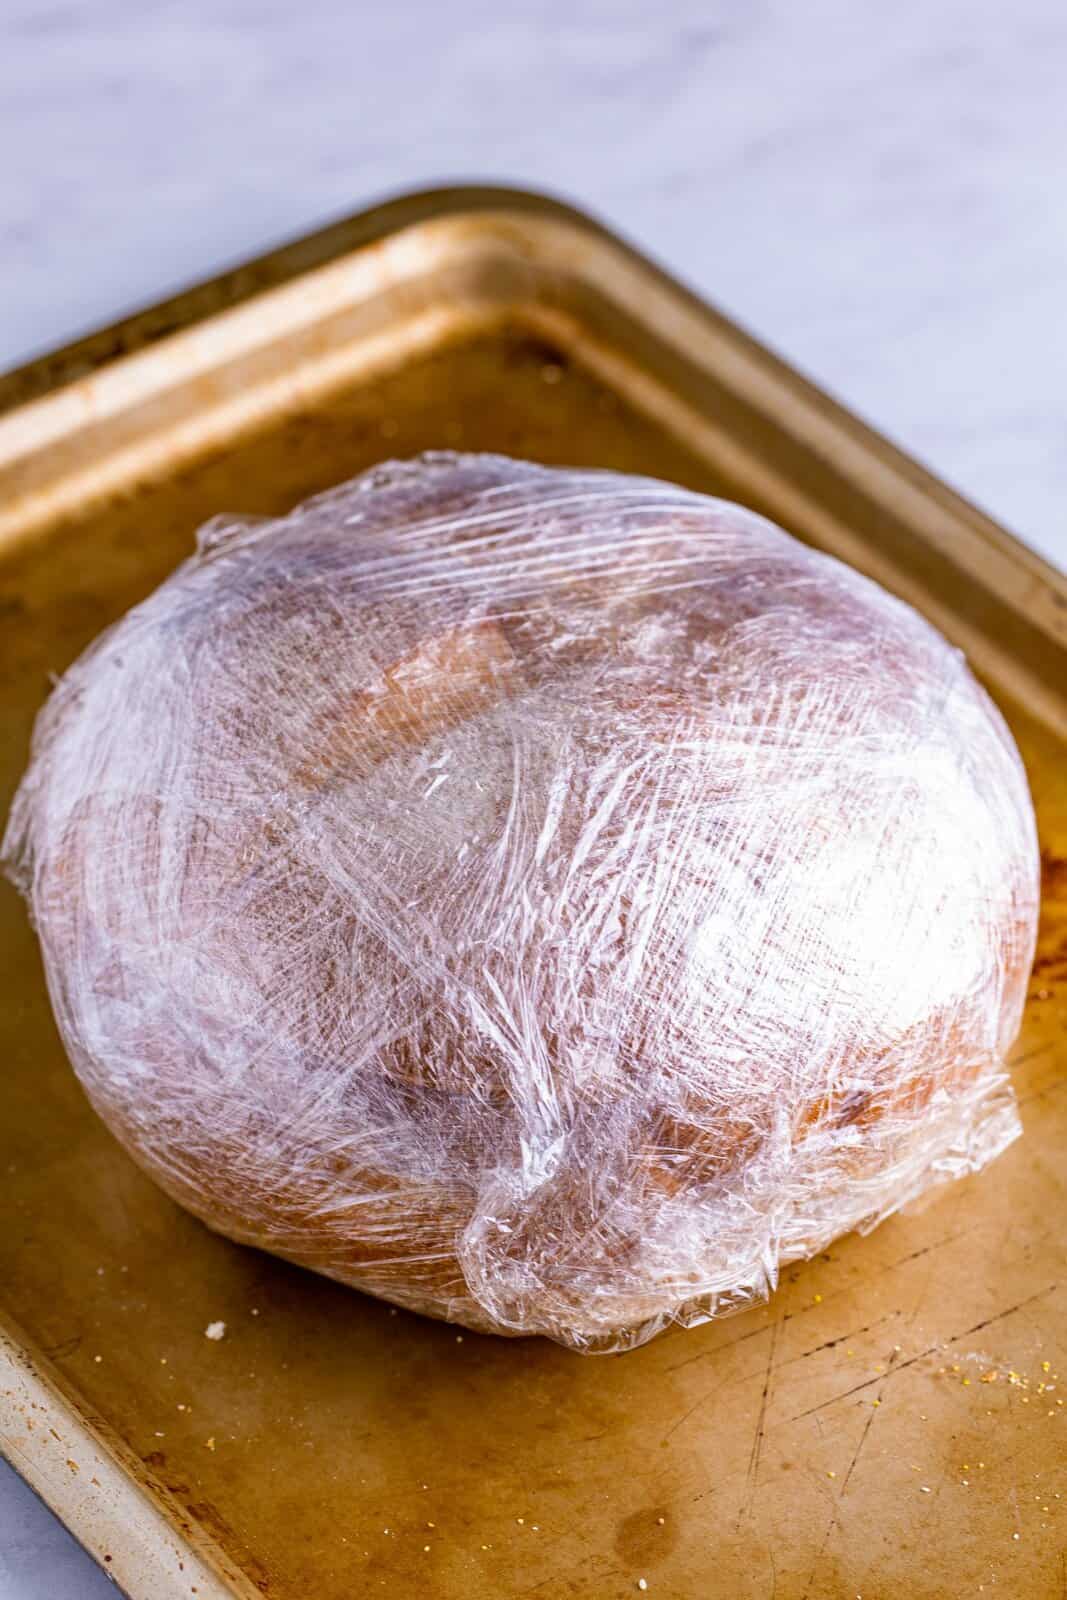 Sandwich wrapped up tightly in plastic wrap.